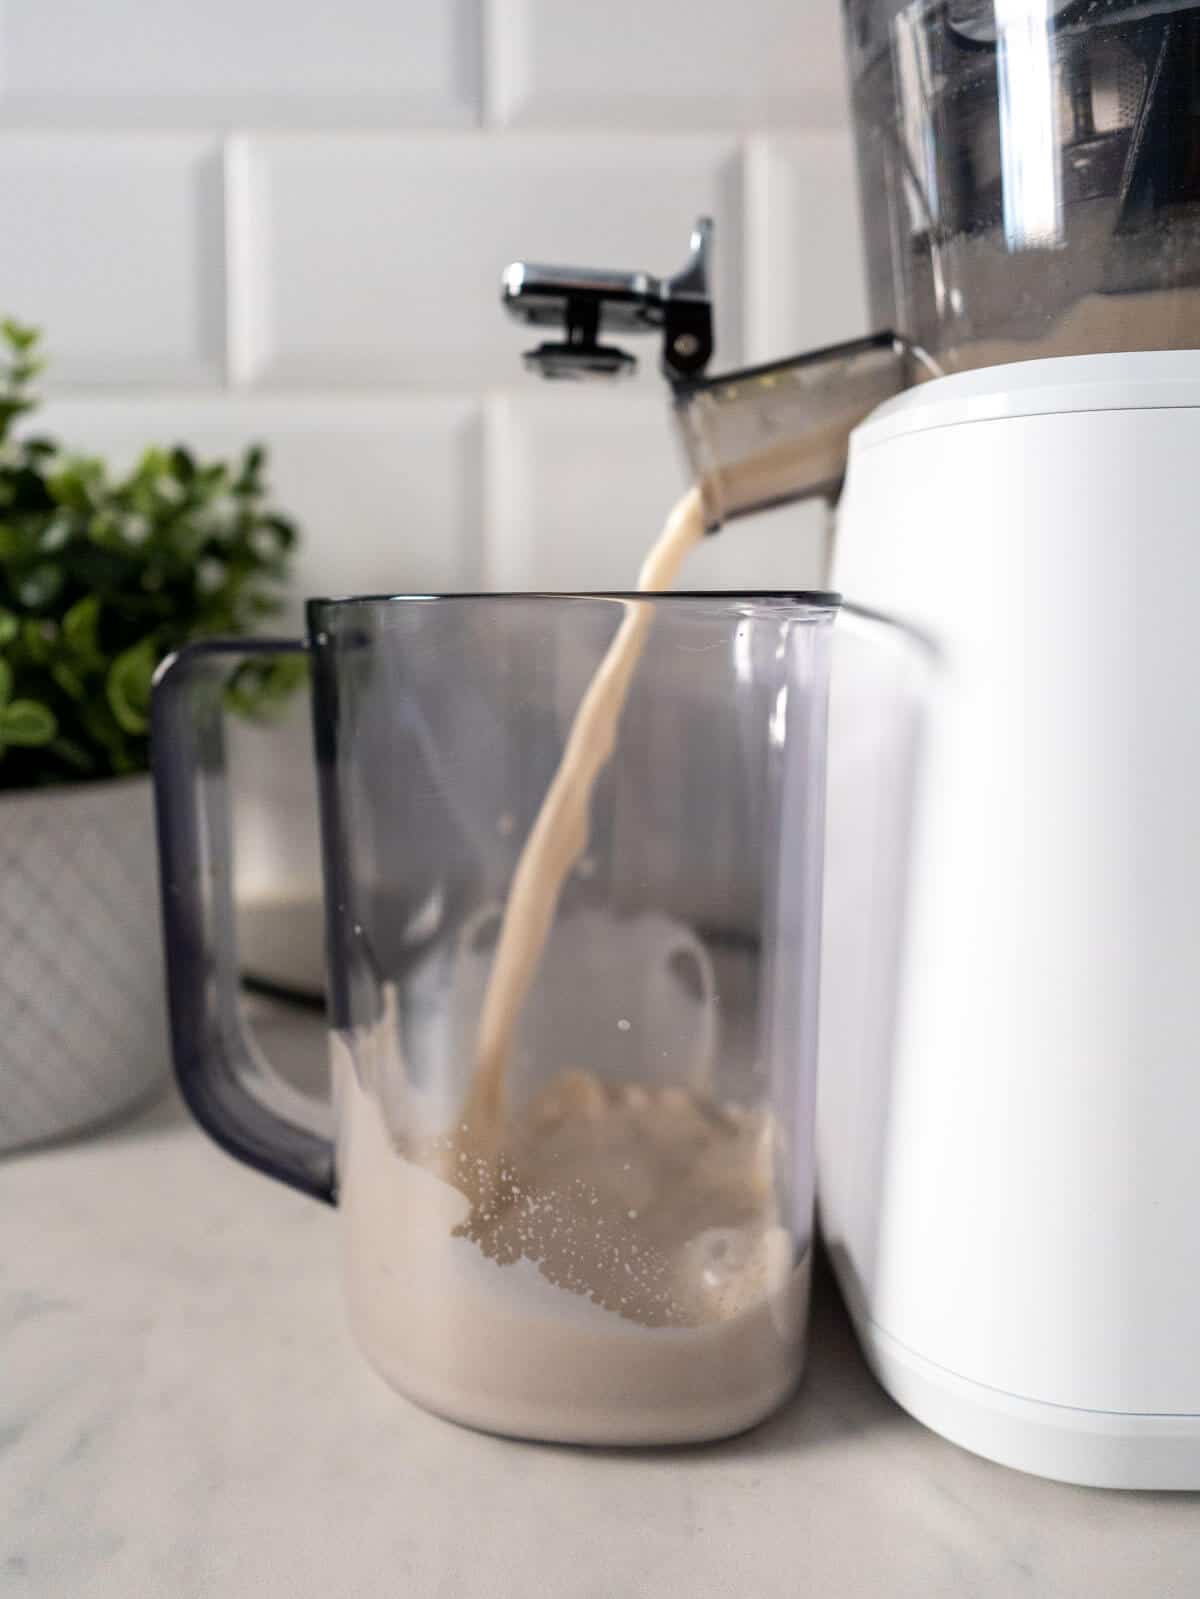 let the cashew milk out of the juicer.